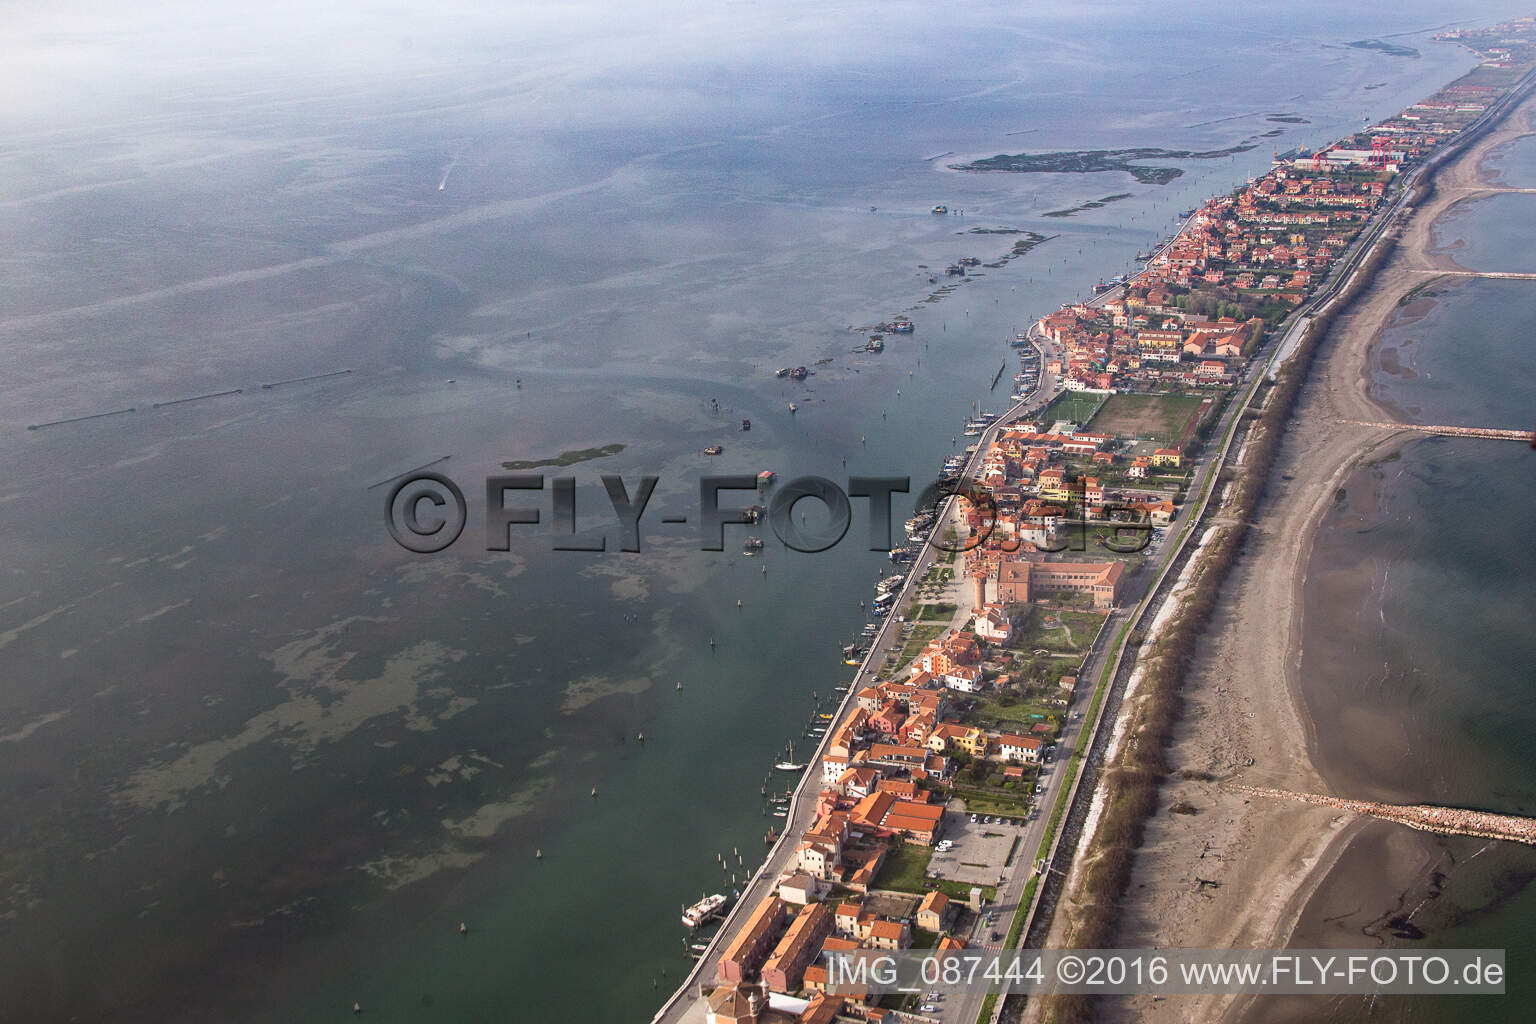 Settlement area in the district Pellestrina in Venedig in Venetien, Italy from the drone perspective